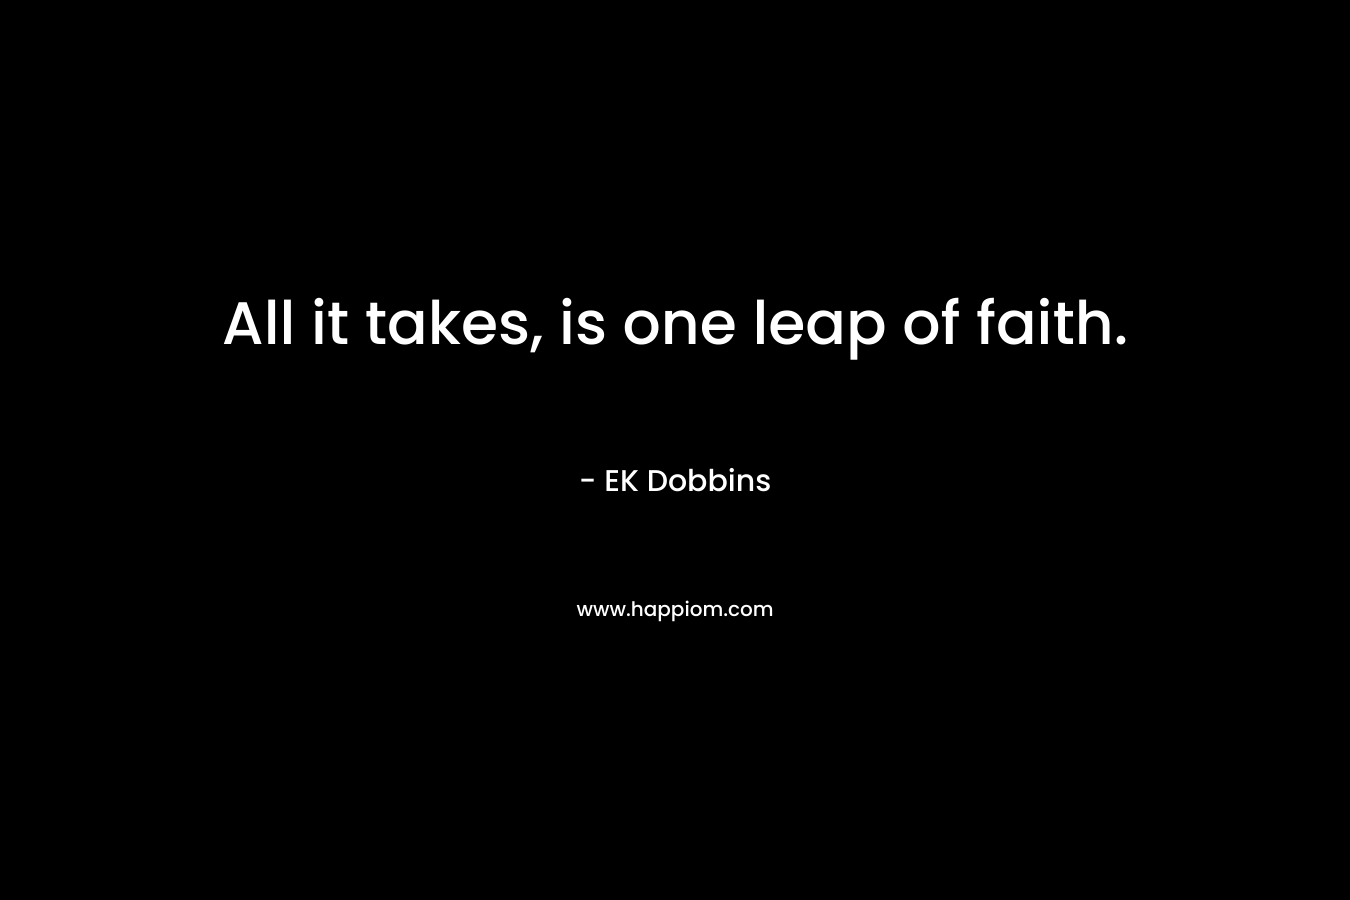 All it takes, is one leap of faith.